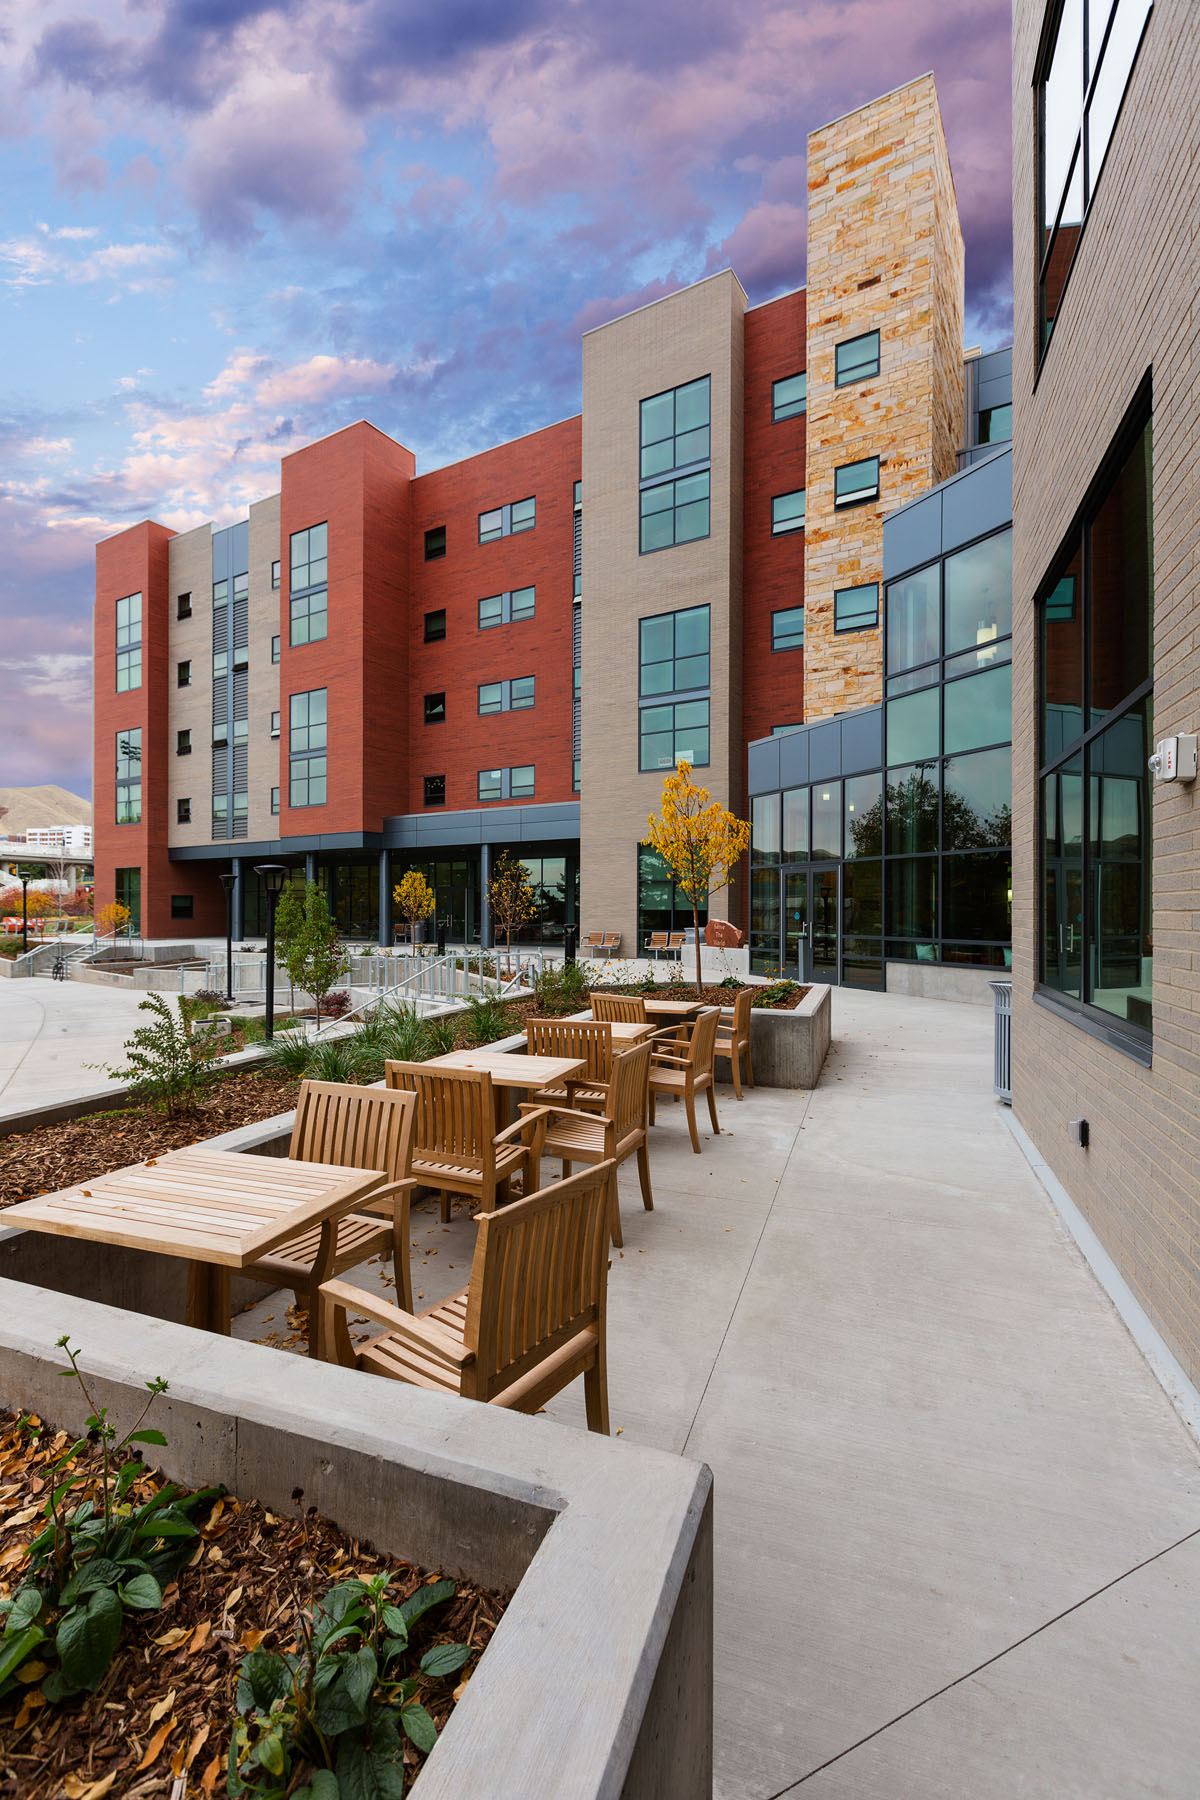 Outdoor wood tables and chairs near the main entrance to the honors student housing.